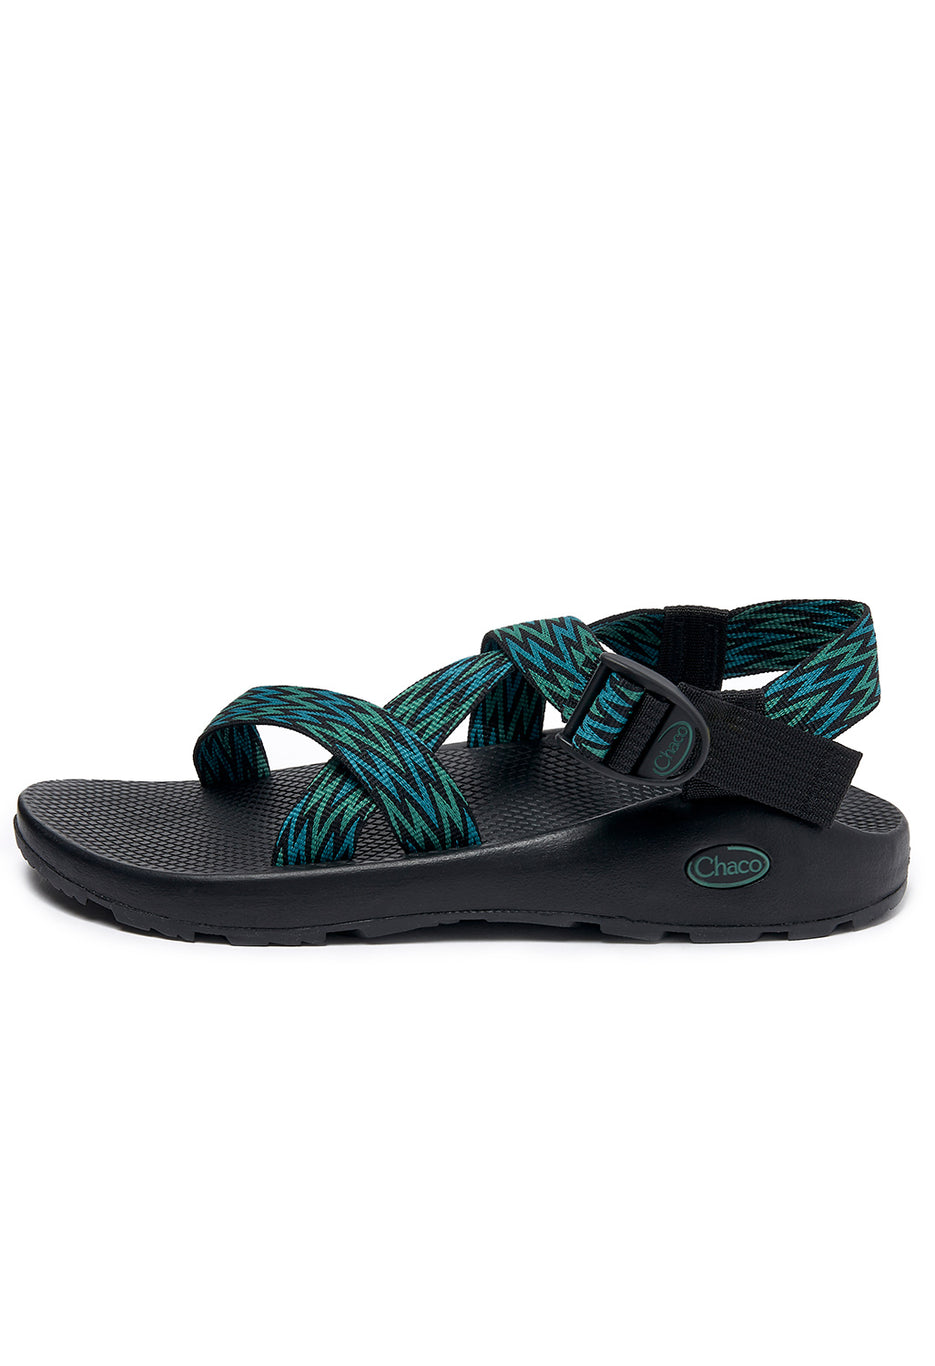 Chaco Men's Z1 Classic Sandals - Squall Green